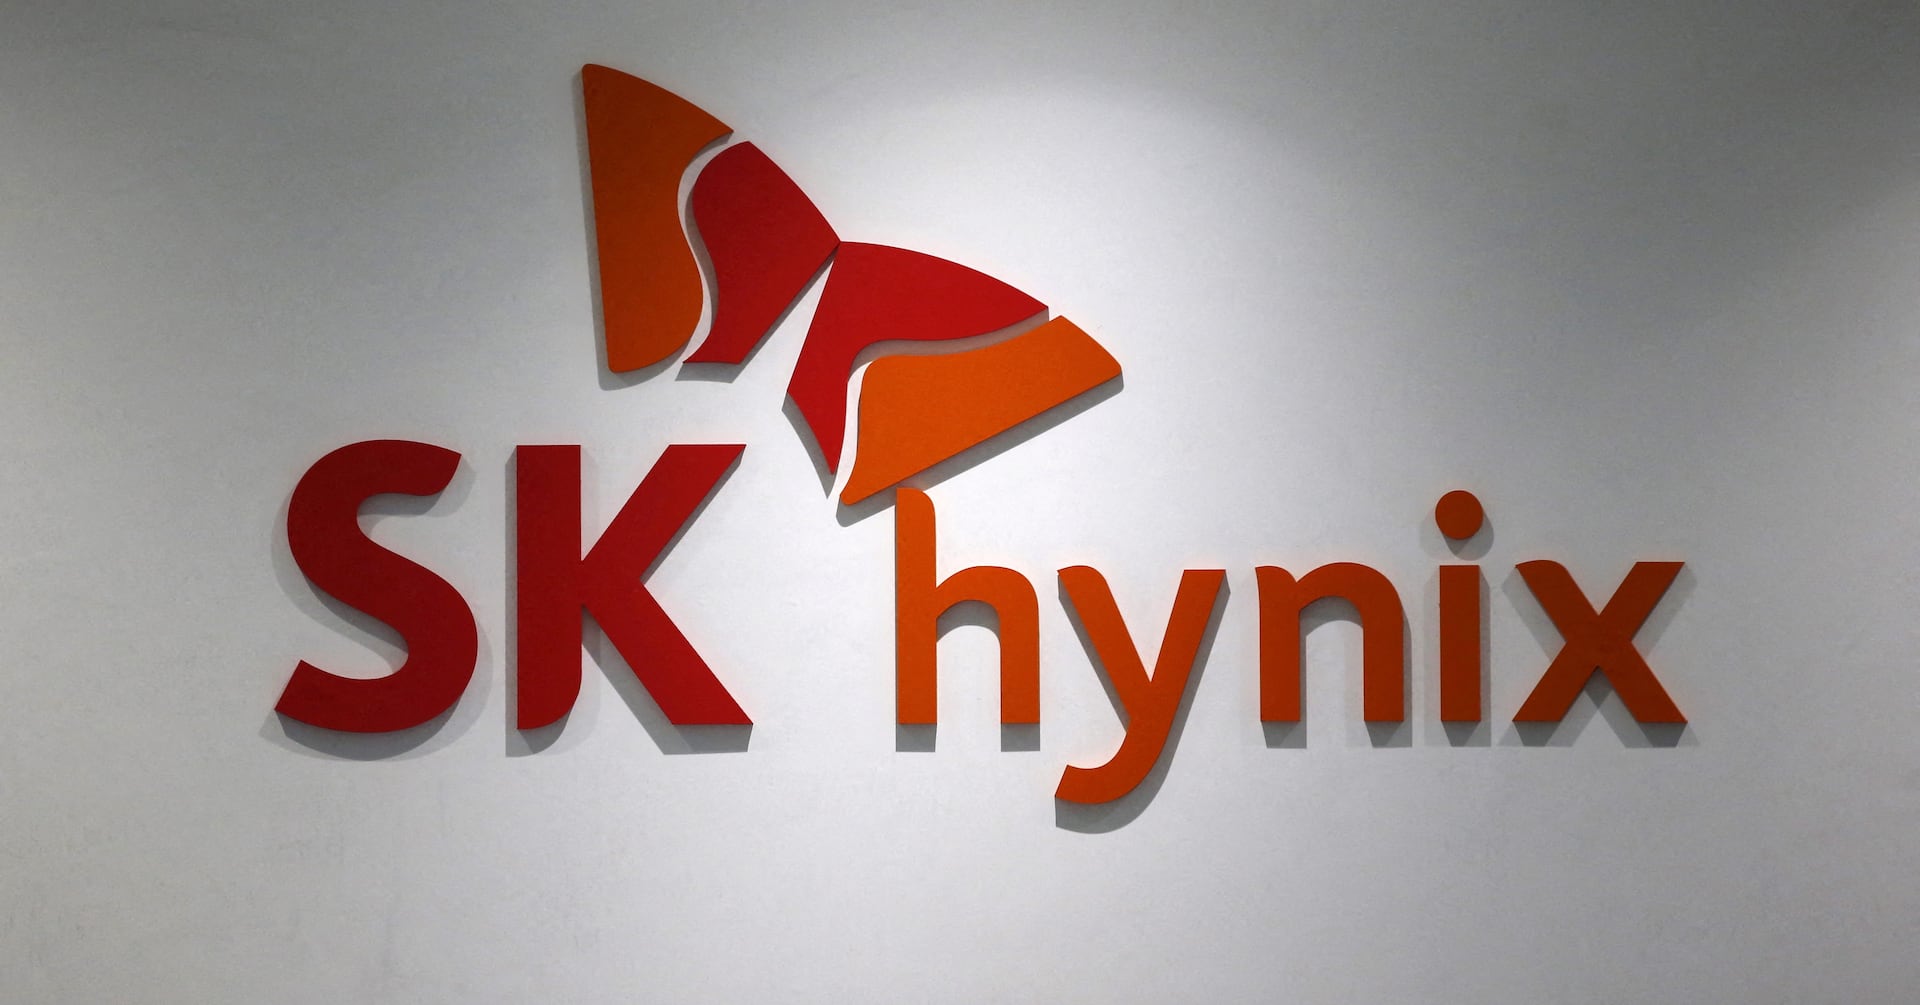 SK Hynix says it will invest ~$3.87B in an advanced packaging plant and R&D facility in Indiana to mass-produce high-bandwidth memory chips starting in H2 2028 (Joyce Lee/Reuters)